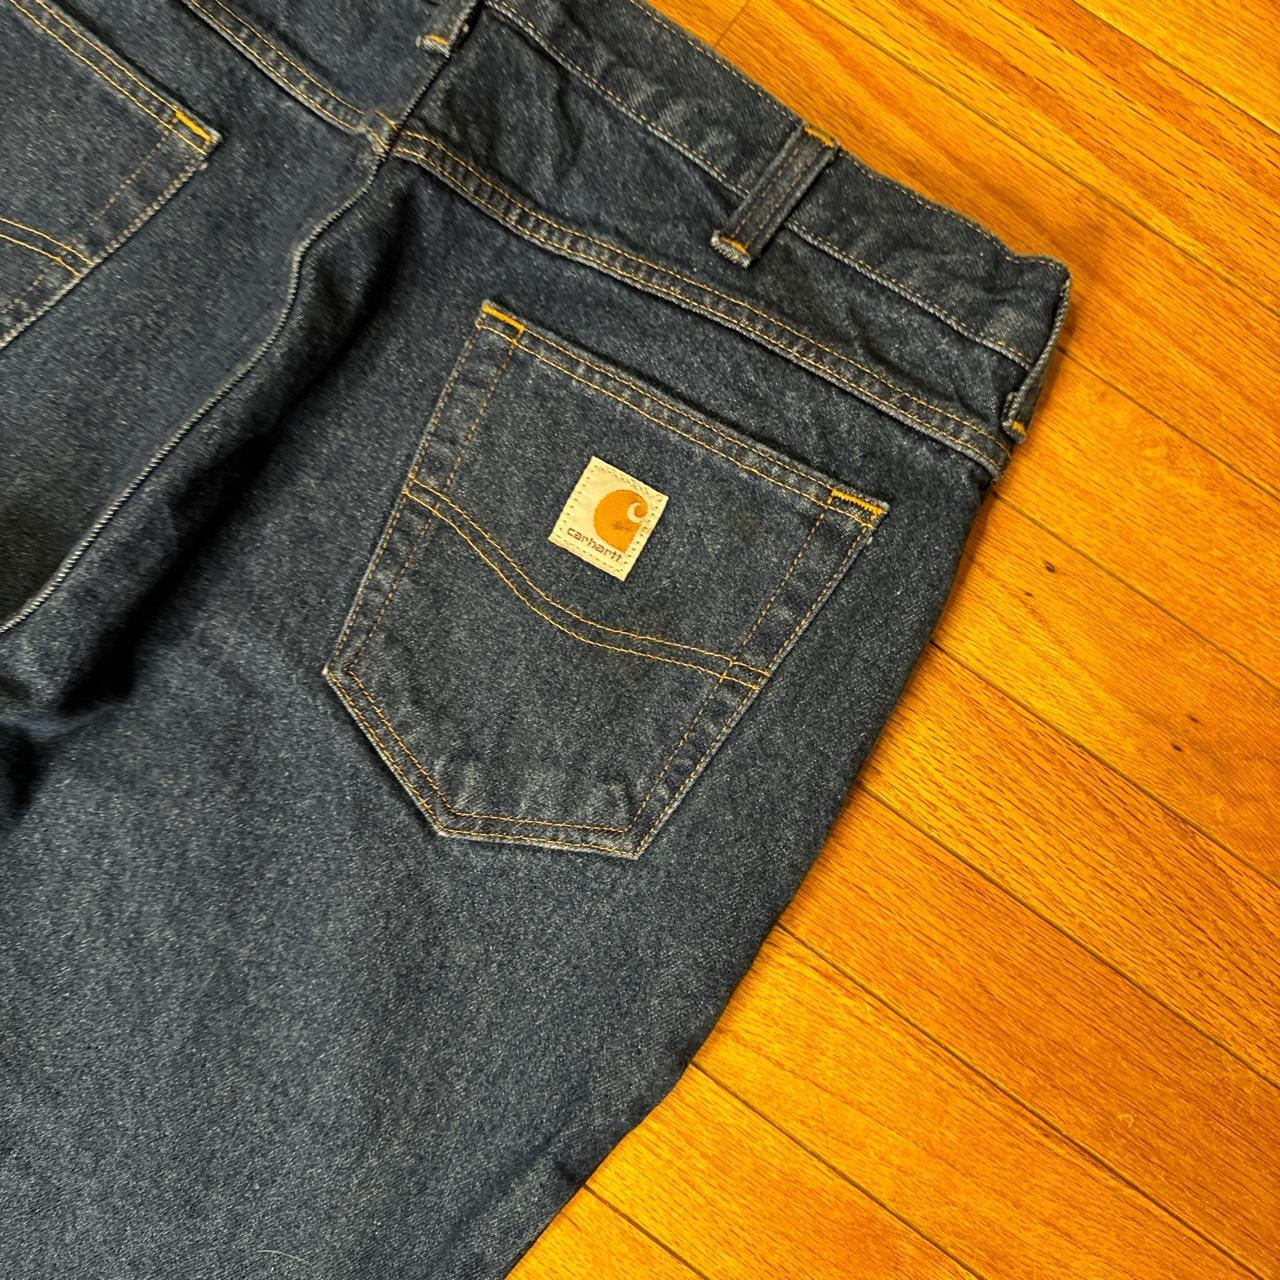 BAGGY CARHARTT BLUE JEANS SIZE 38 FREE SHIPPING ON... - Depop